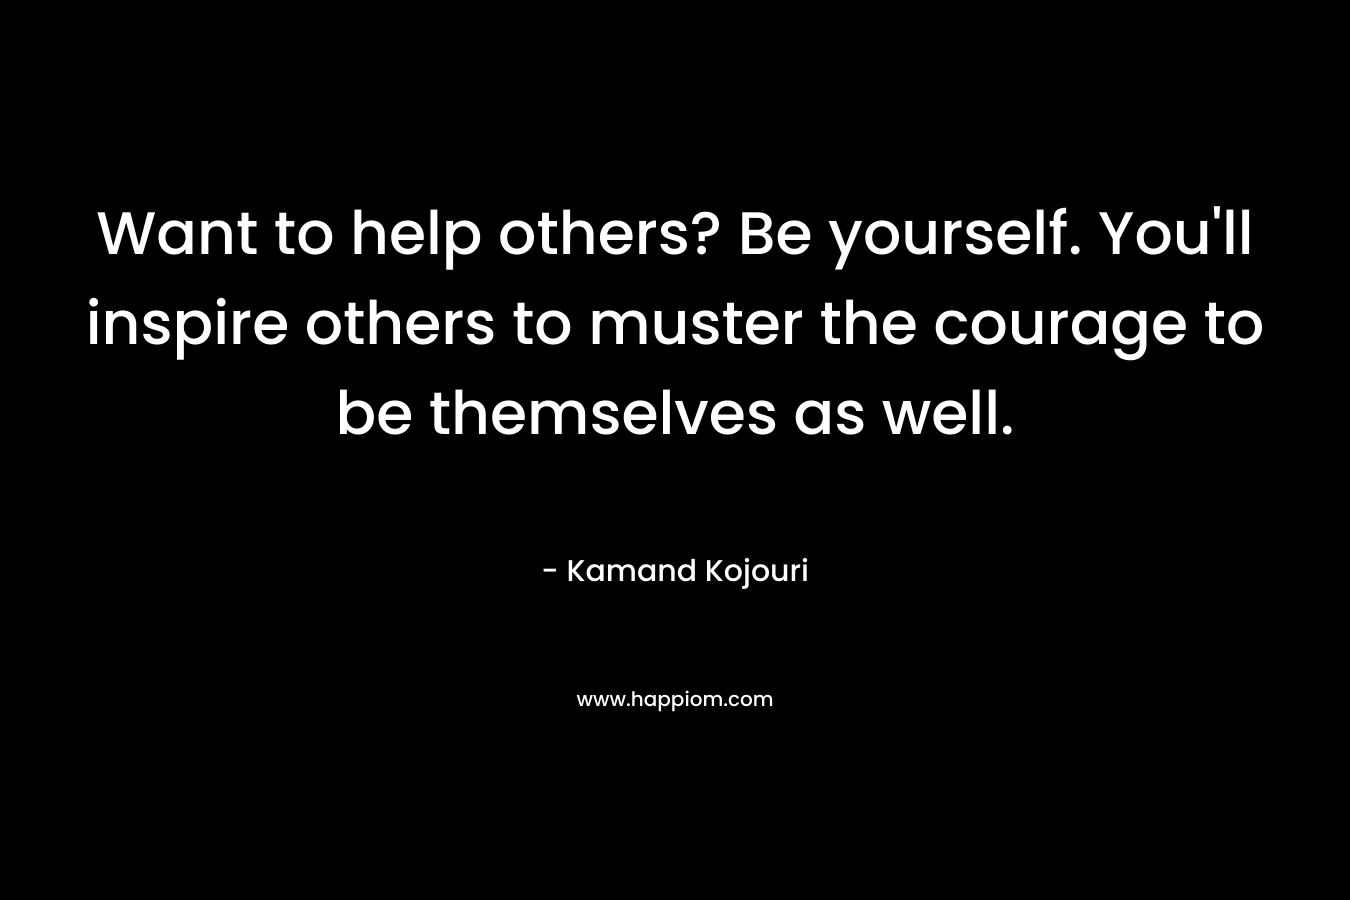 Want to help others? Be yourself. You'll inspire others to muster the courage to be themselves as well.